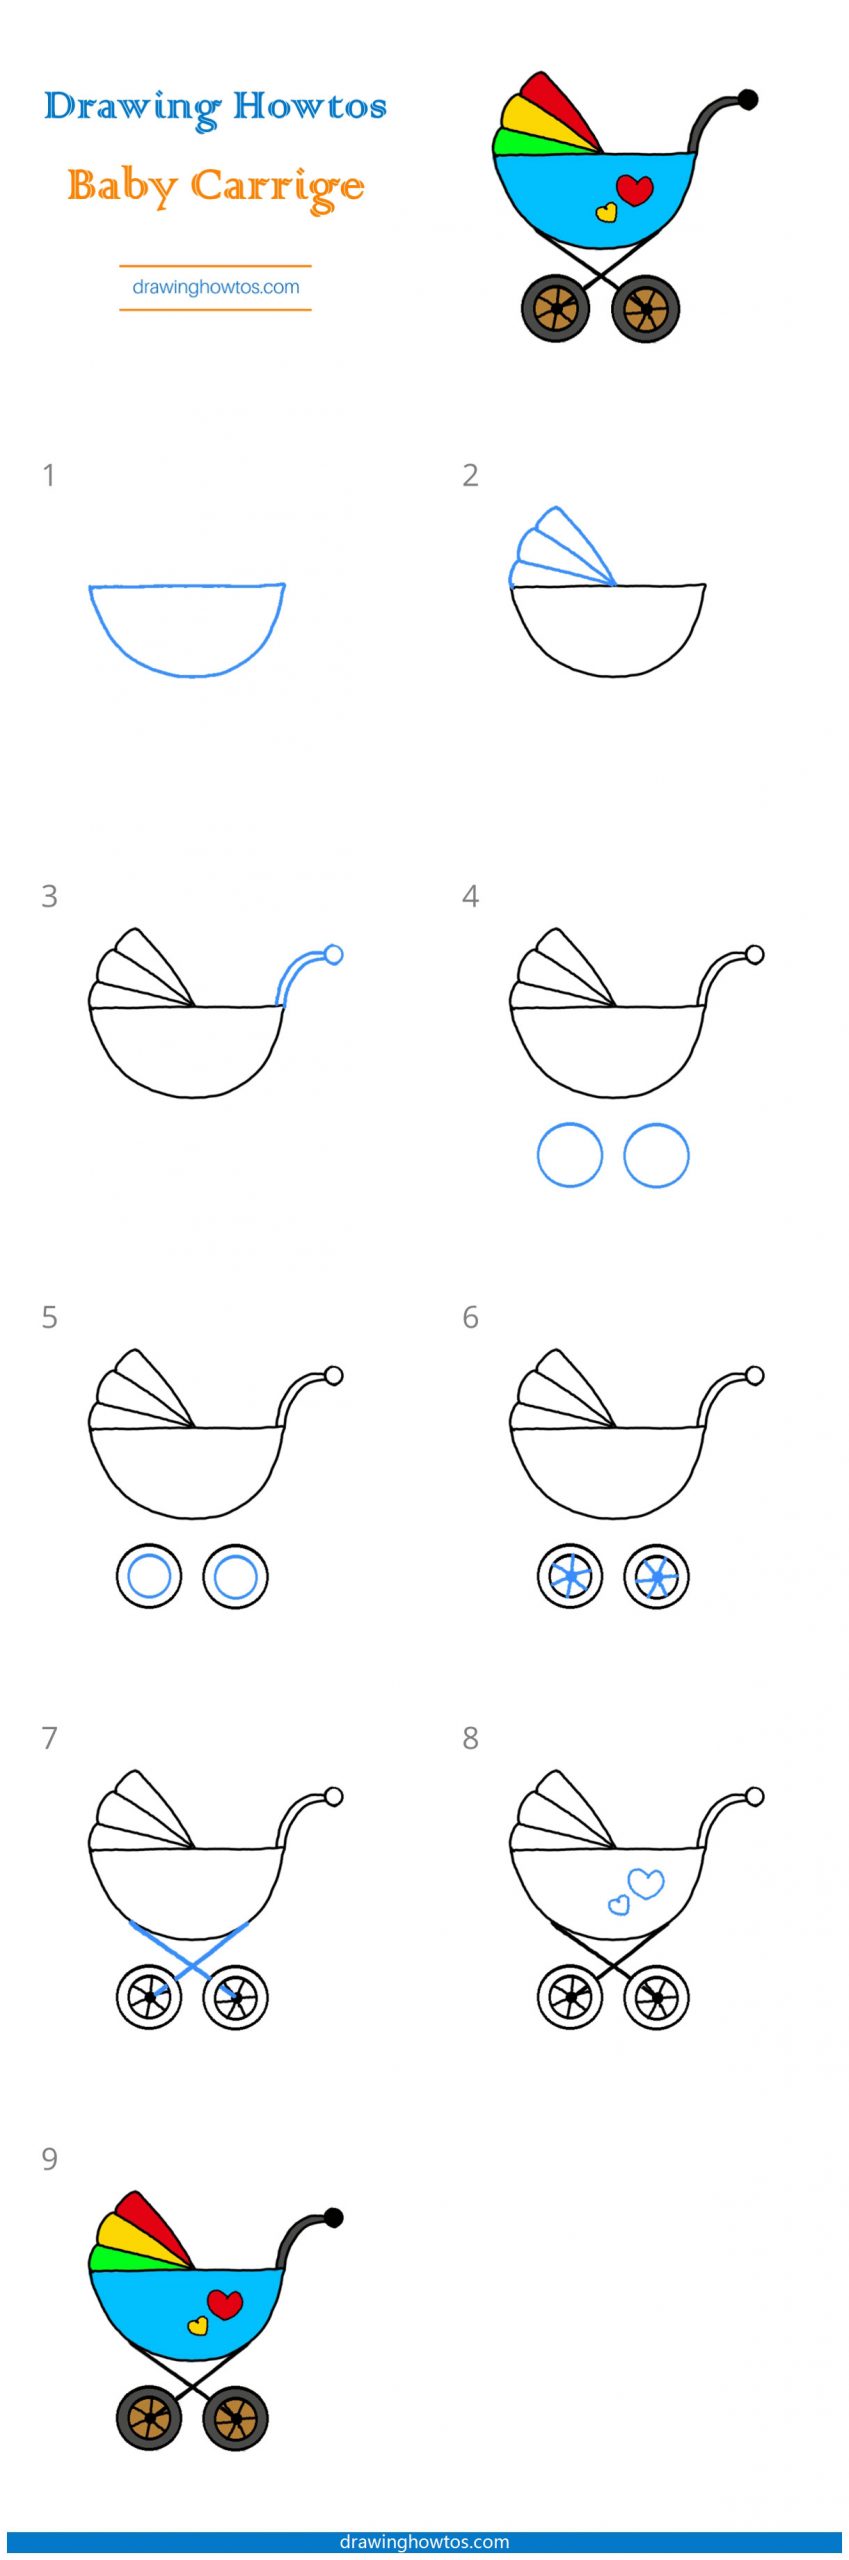 How to Draw a Baby Carriage Step by Step